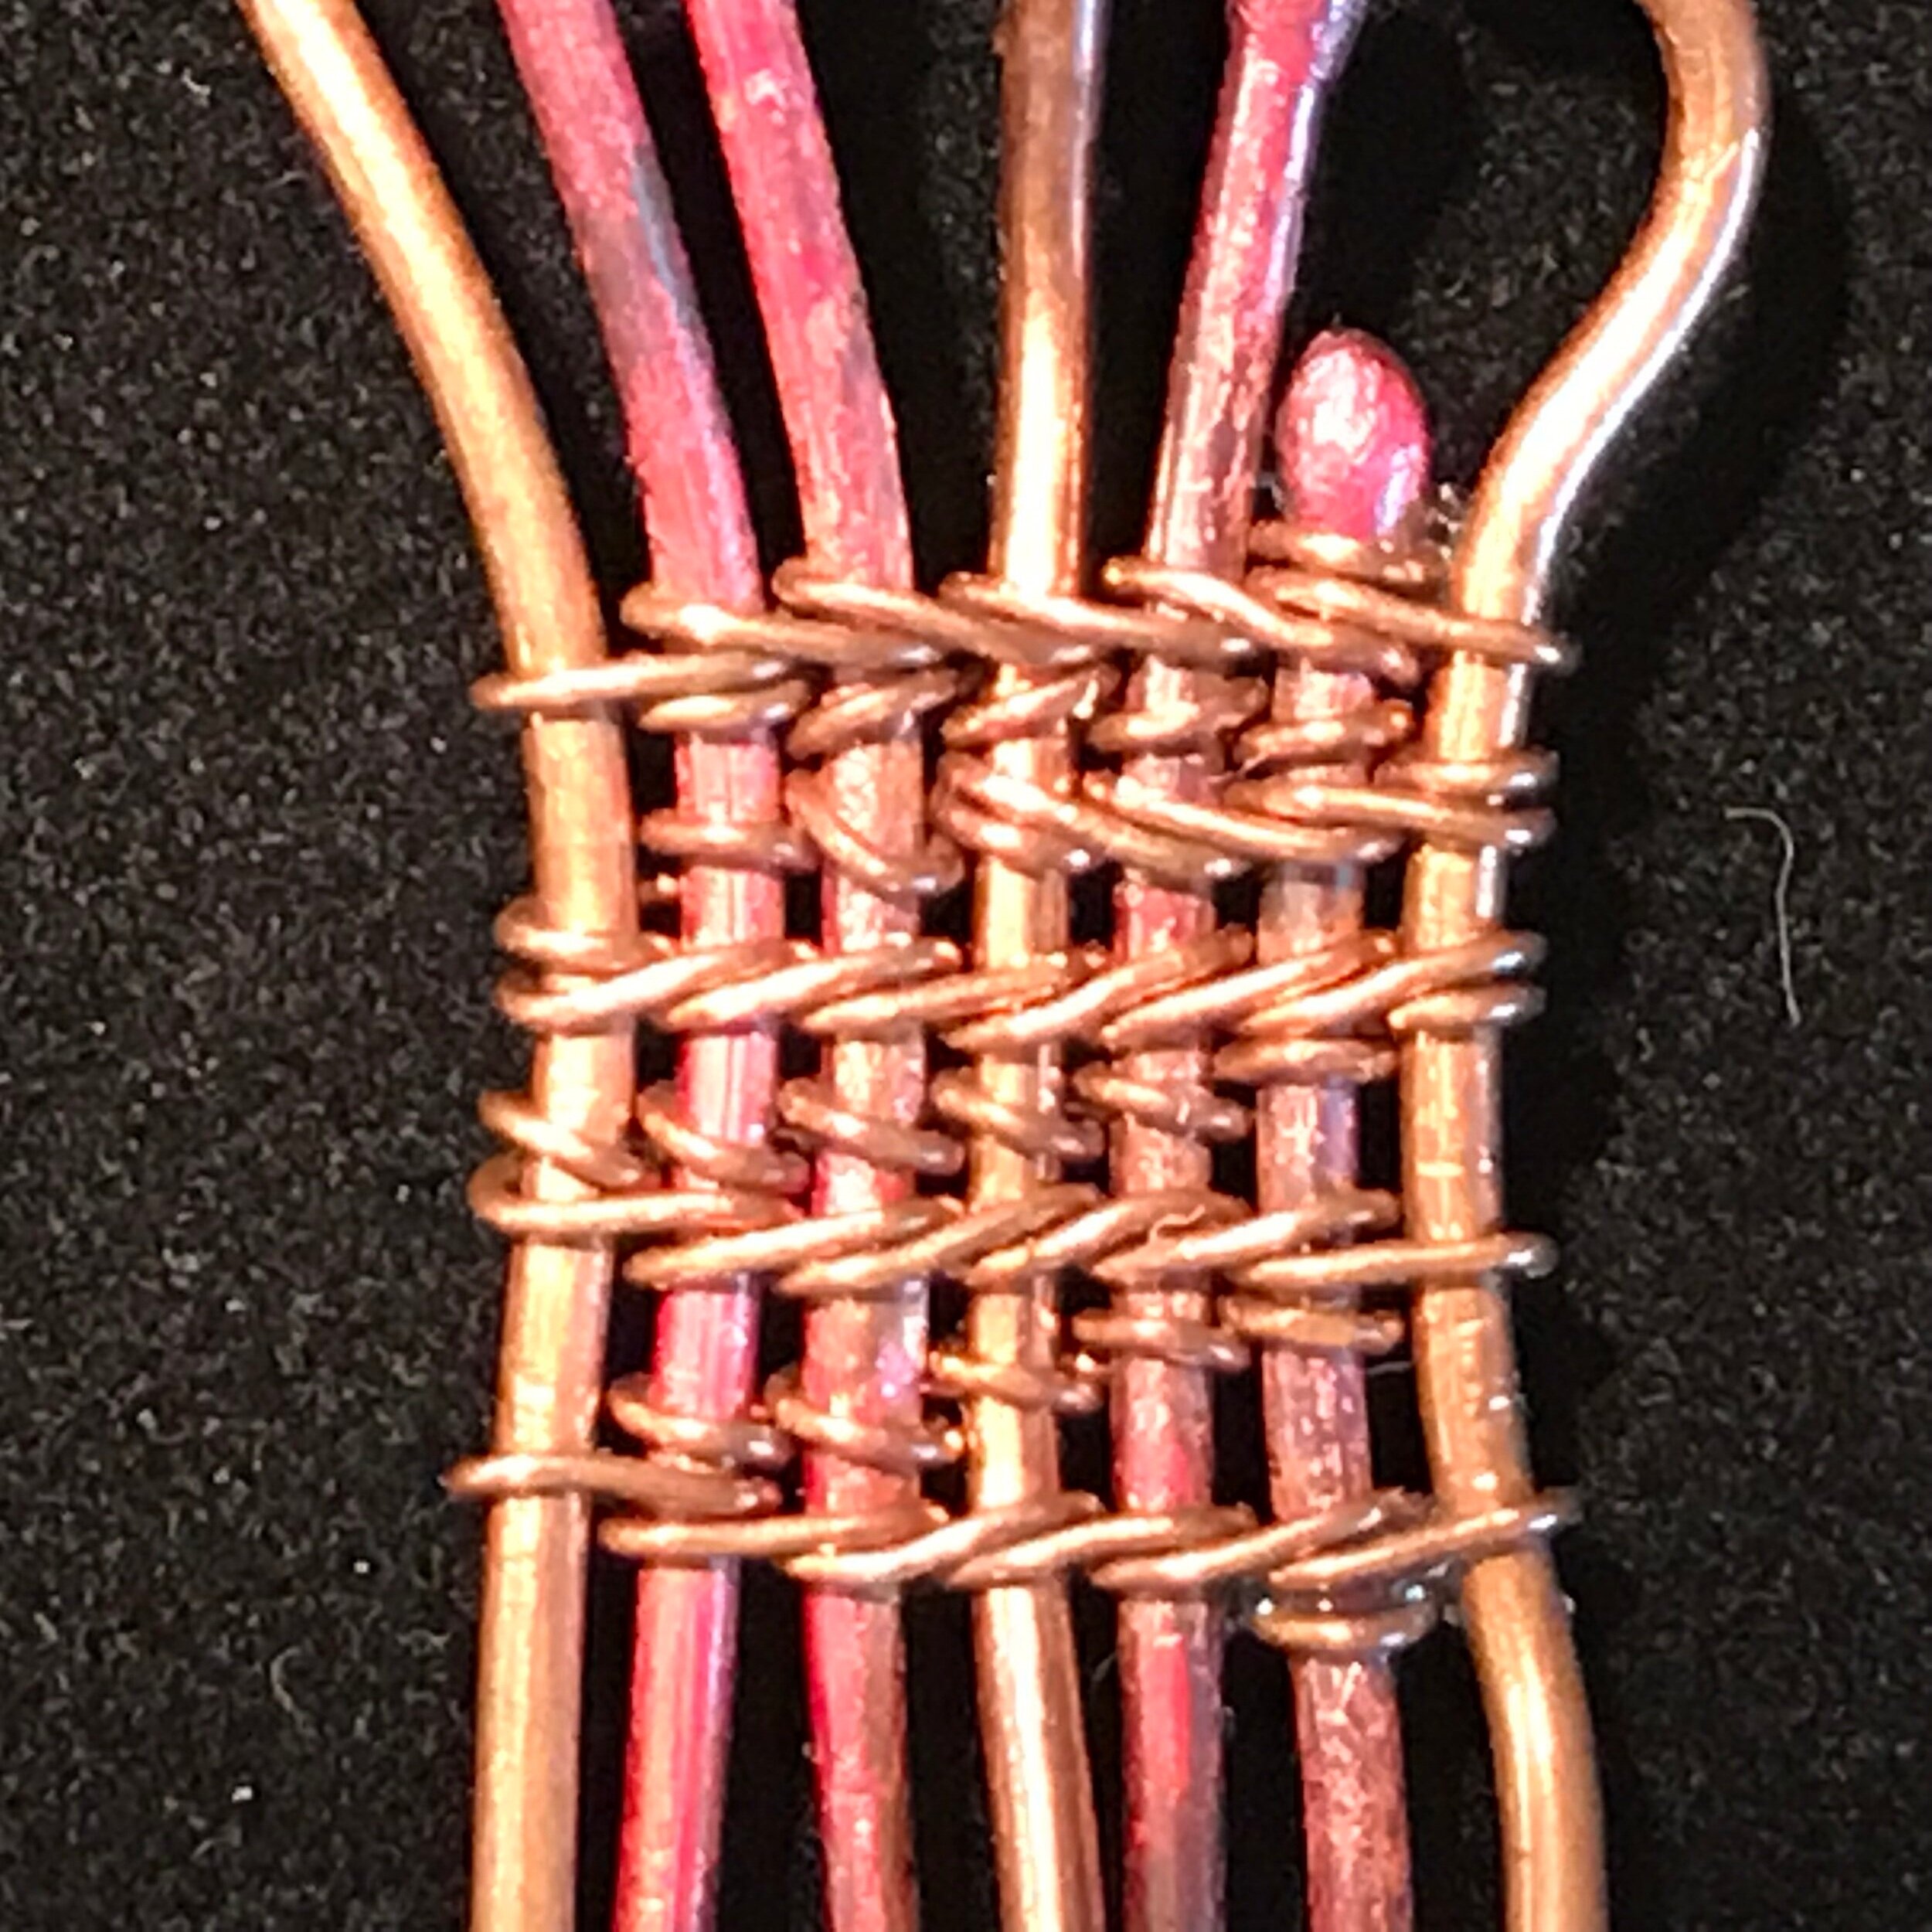 The wire weaving pattern that I prefer is called flame stitch